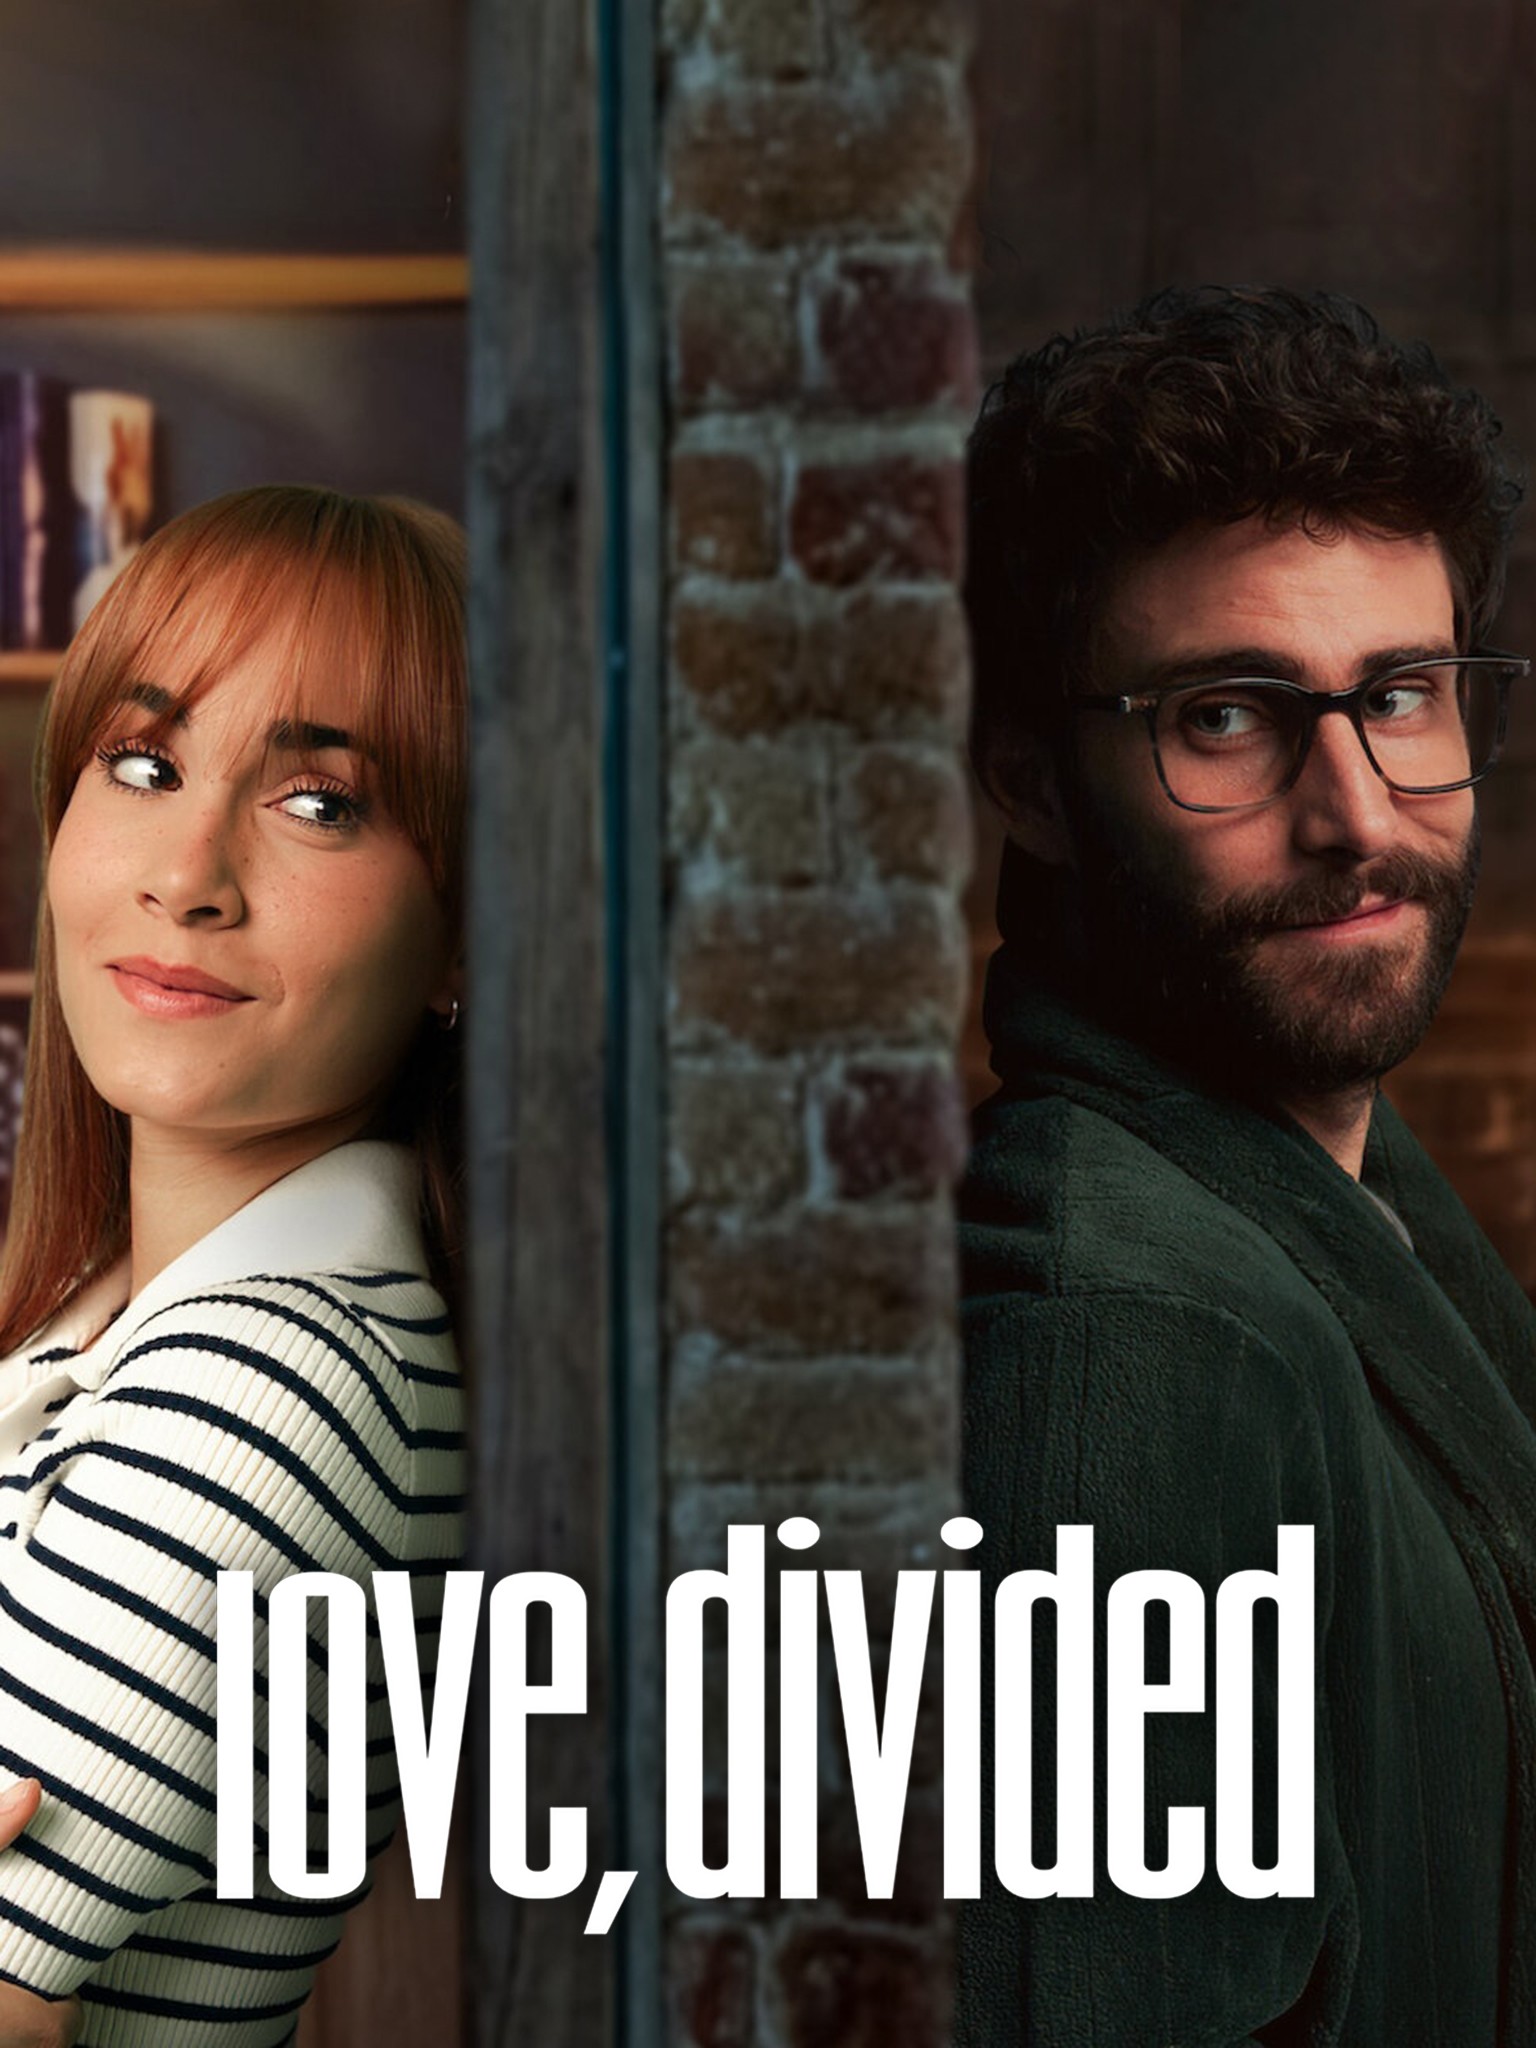 Love divided Hindi Dubbed Full Movie Watch Online HD Print Free Download